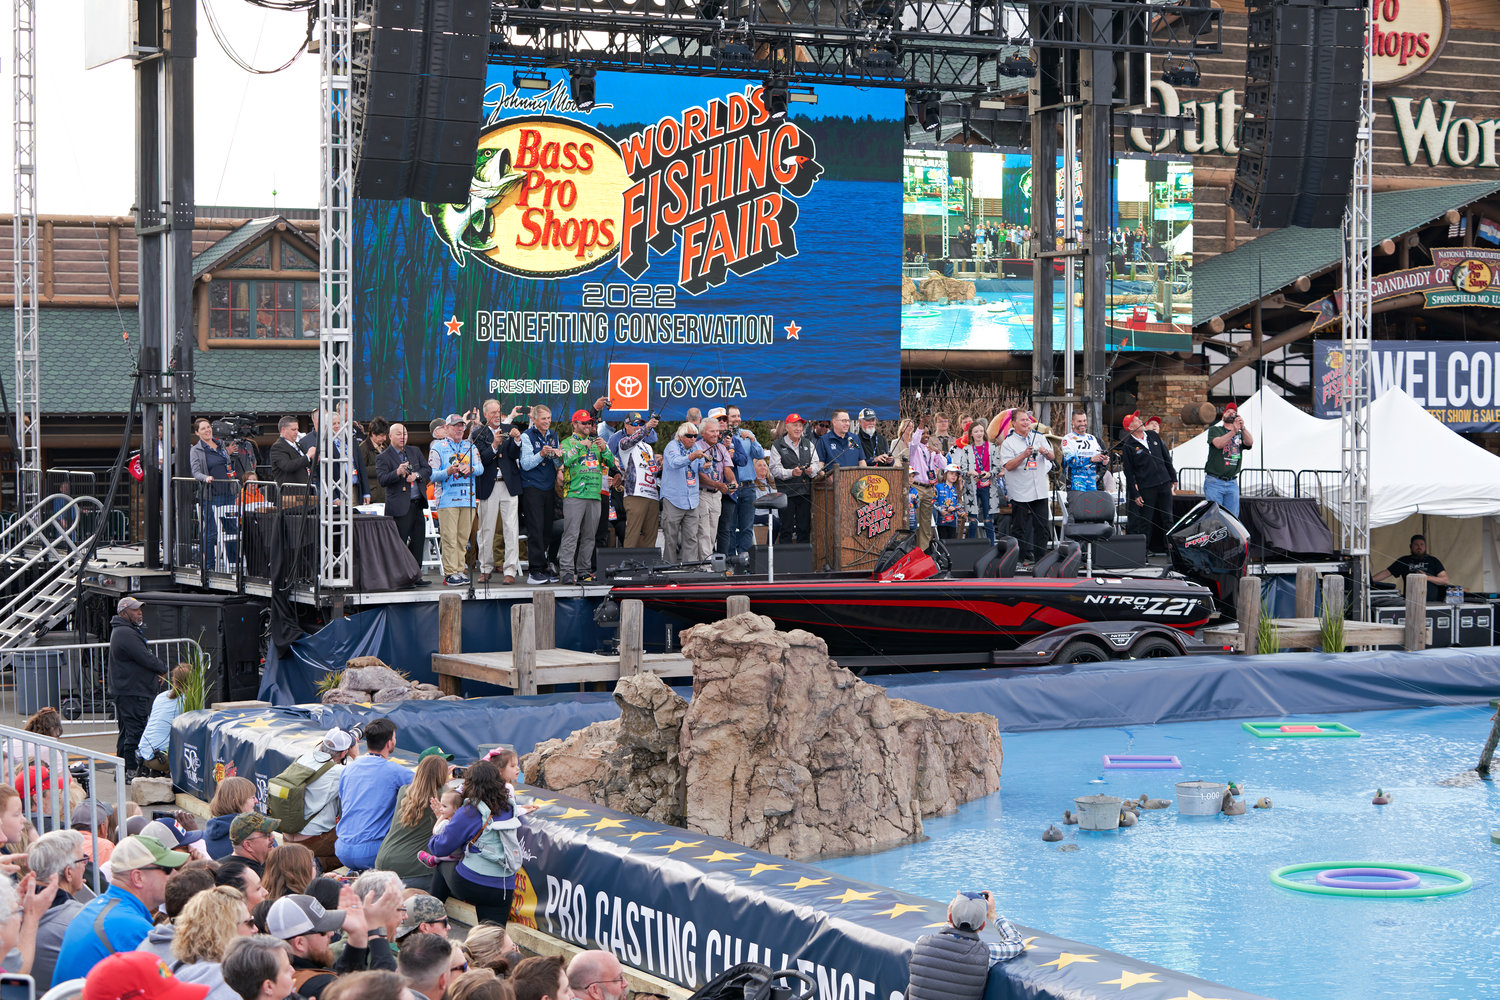 A first ceremonial cast opens the World’s Fishing Fair Wednesday at Springfield's flagship store.